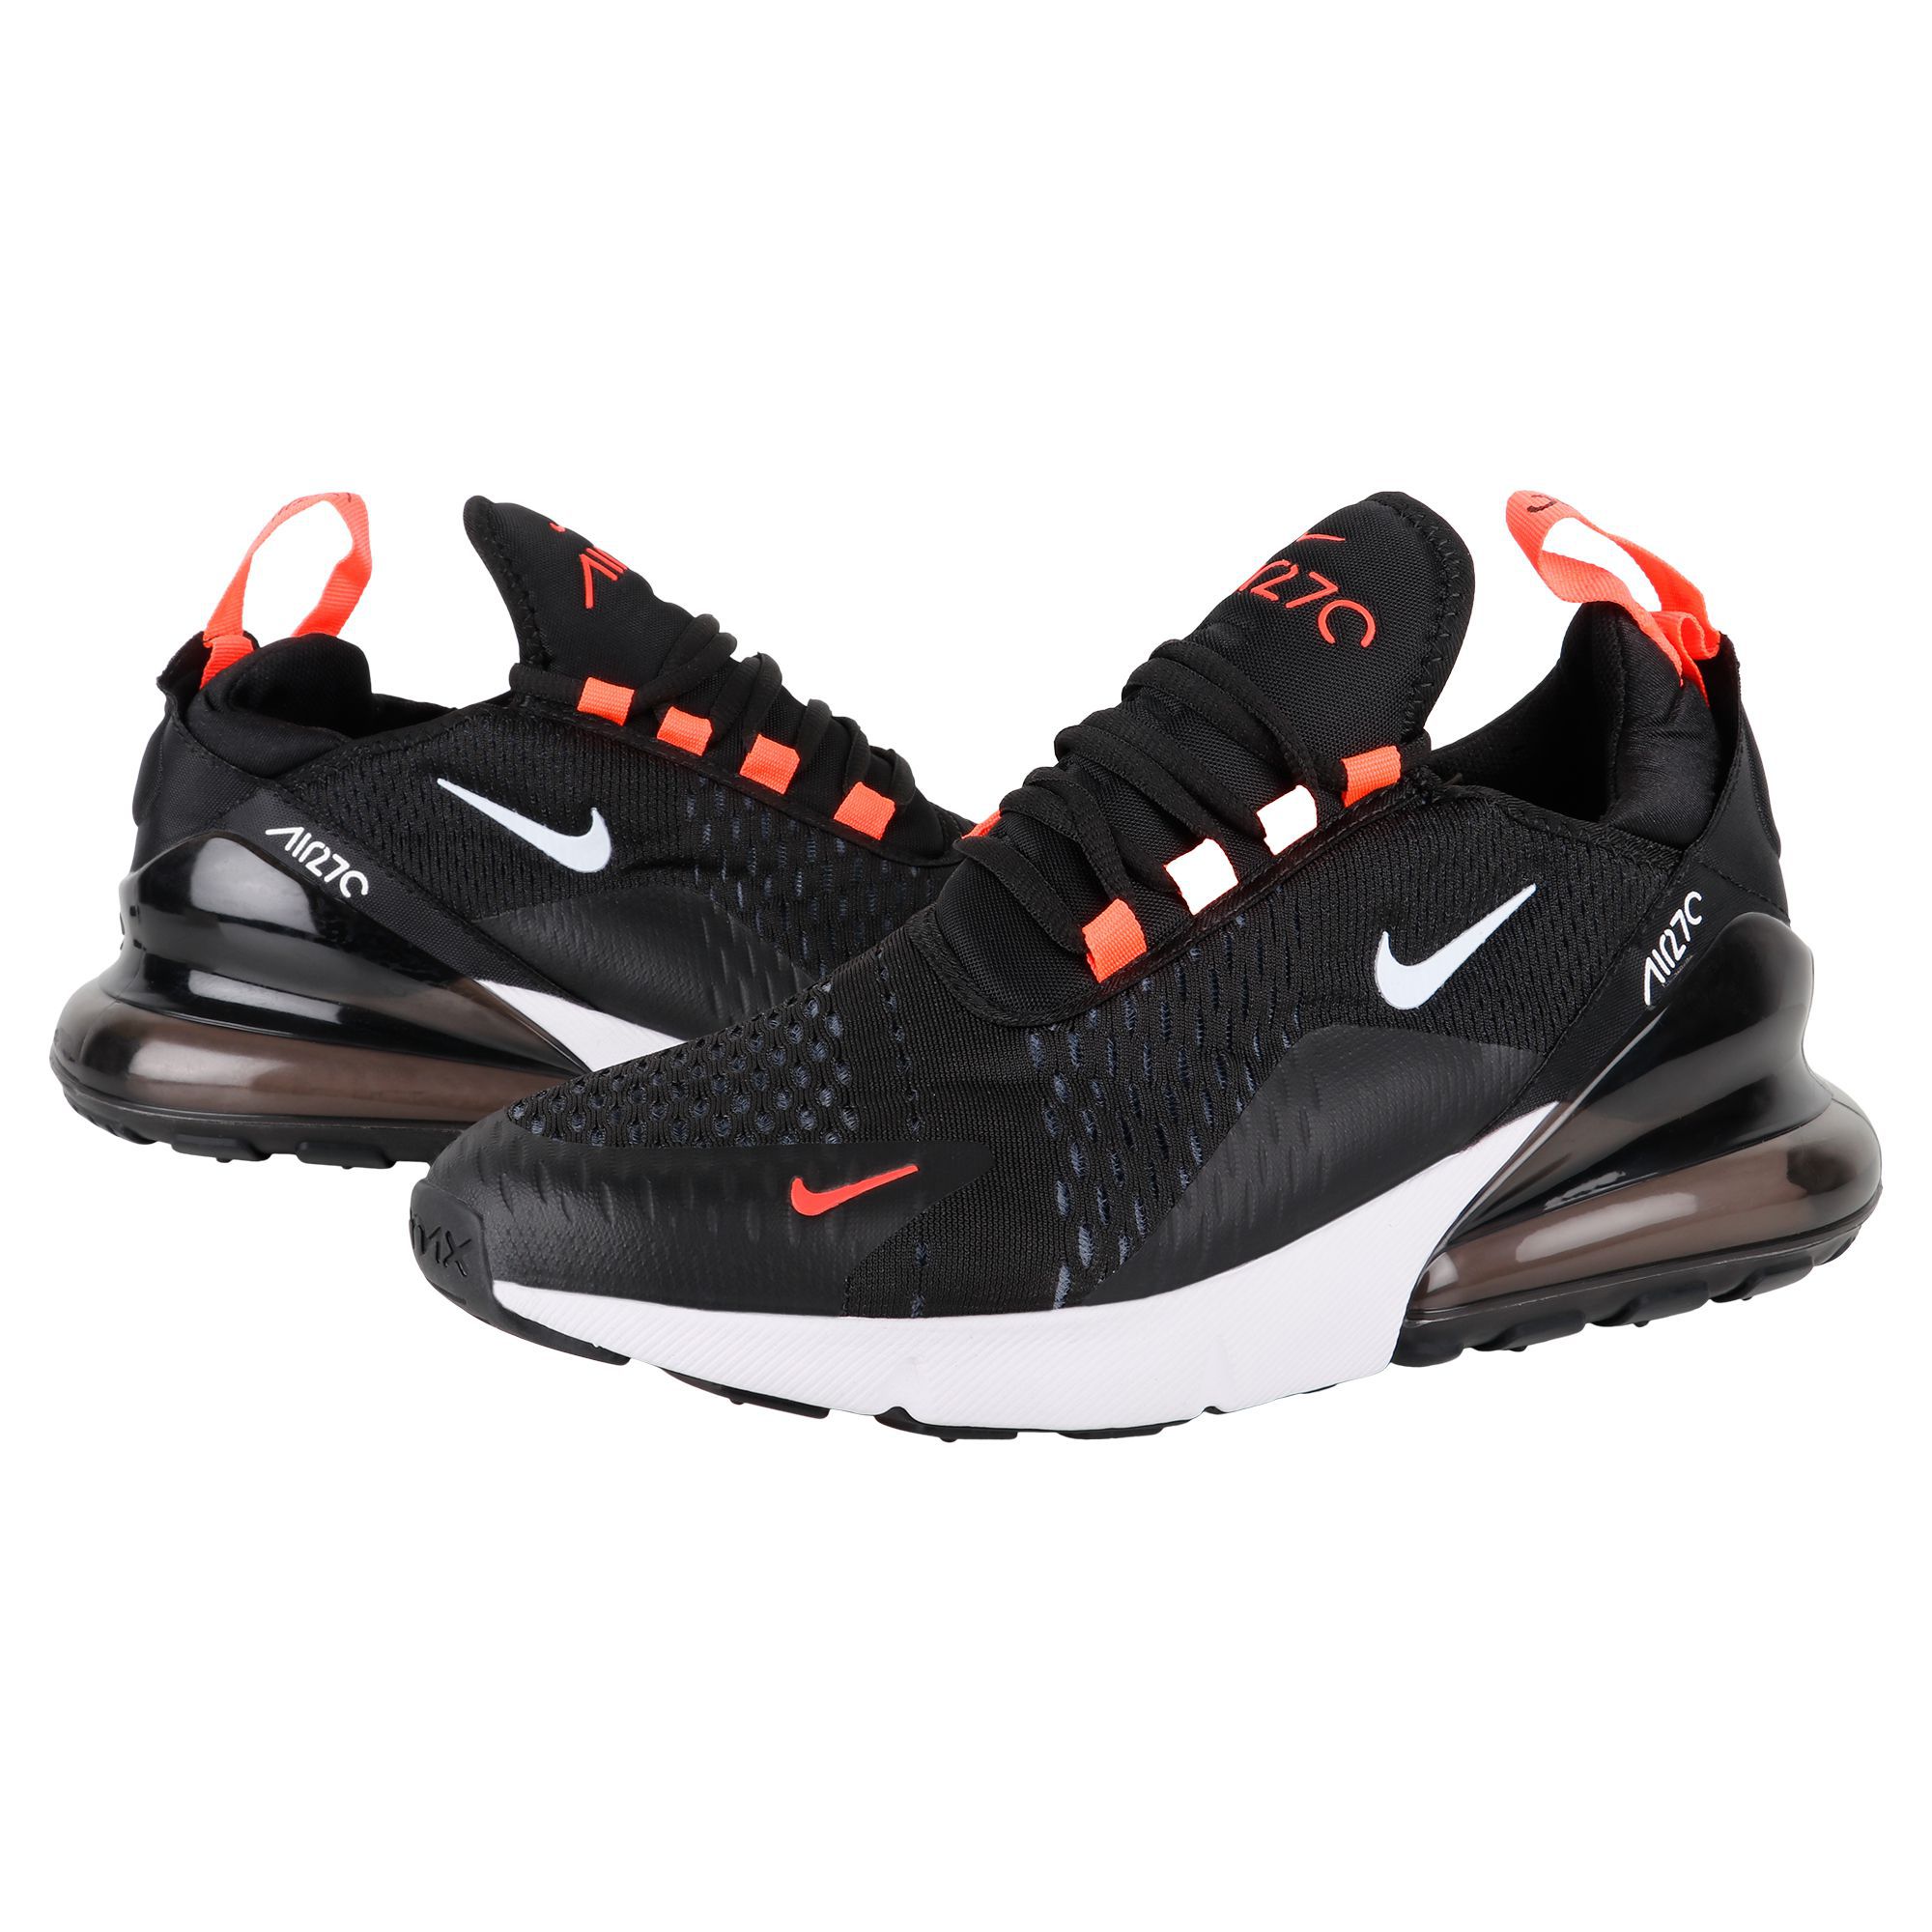 Buy Nike Air Max 270 Multicolor Running Shoe Online @ ₹2899 from ShopClues